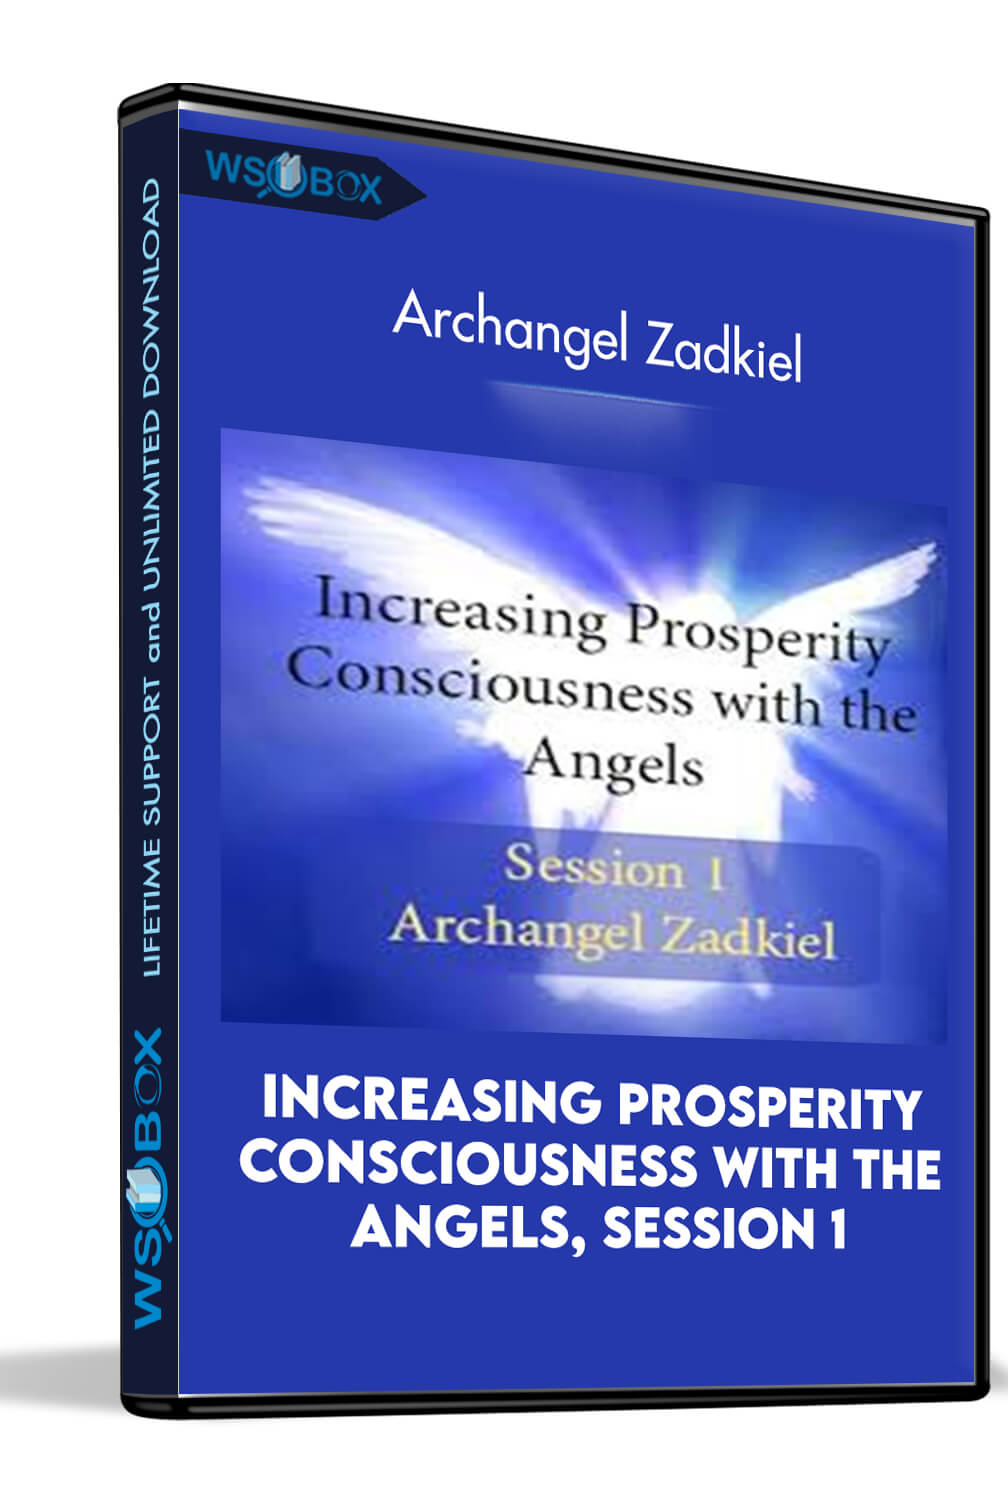 Increasing Prosperity Consciousness with the Angels, Session 1: Archangel Zadkiel